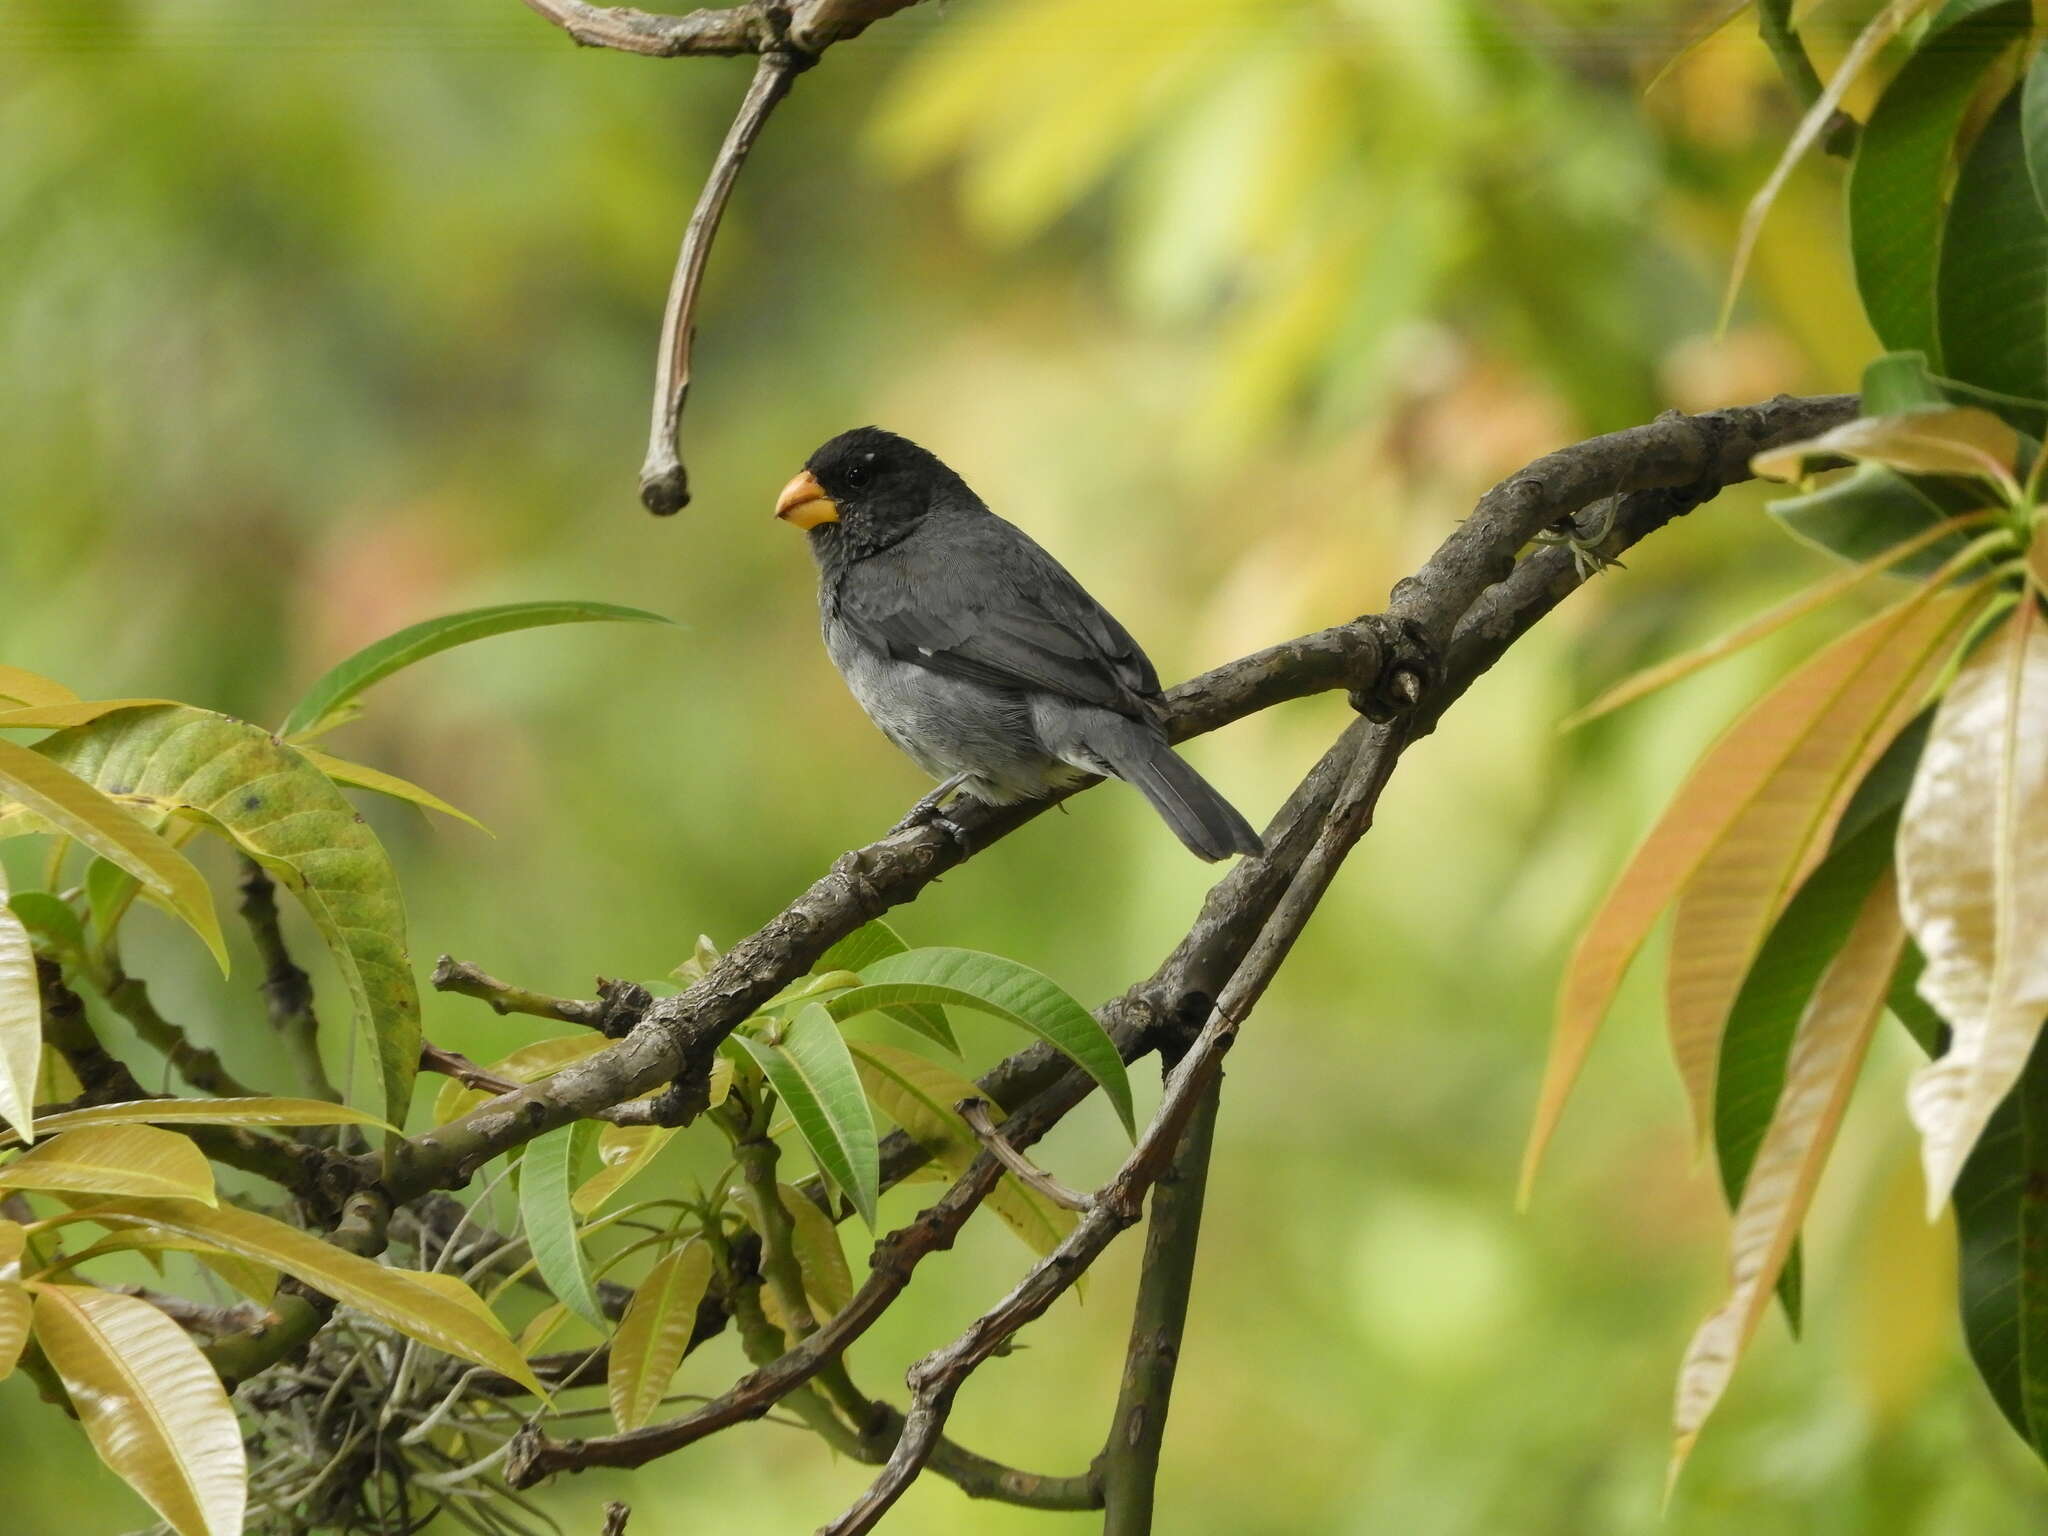 Image of Gray Seedeater